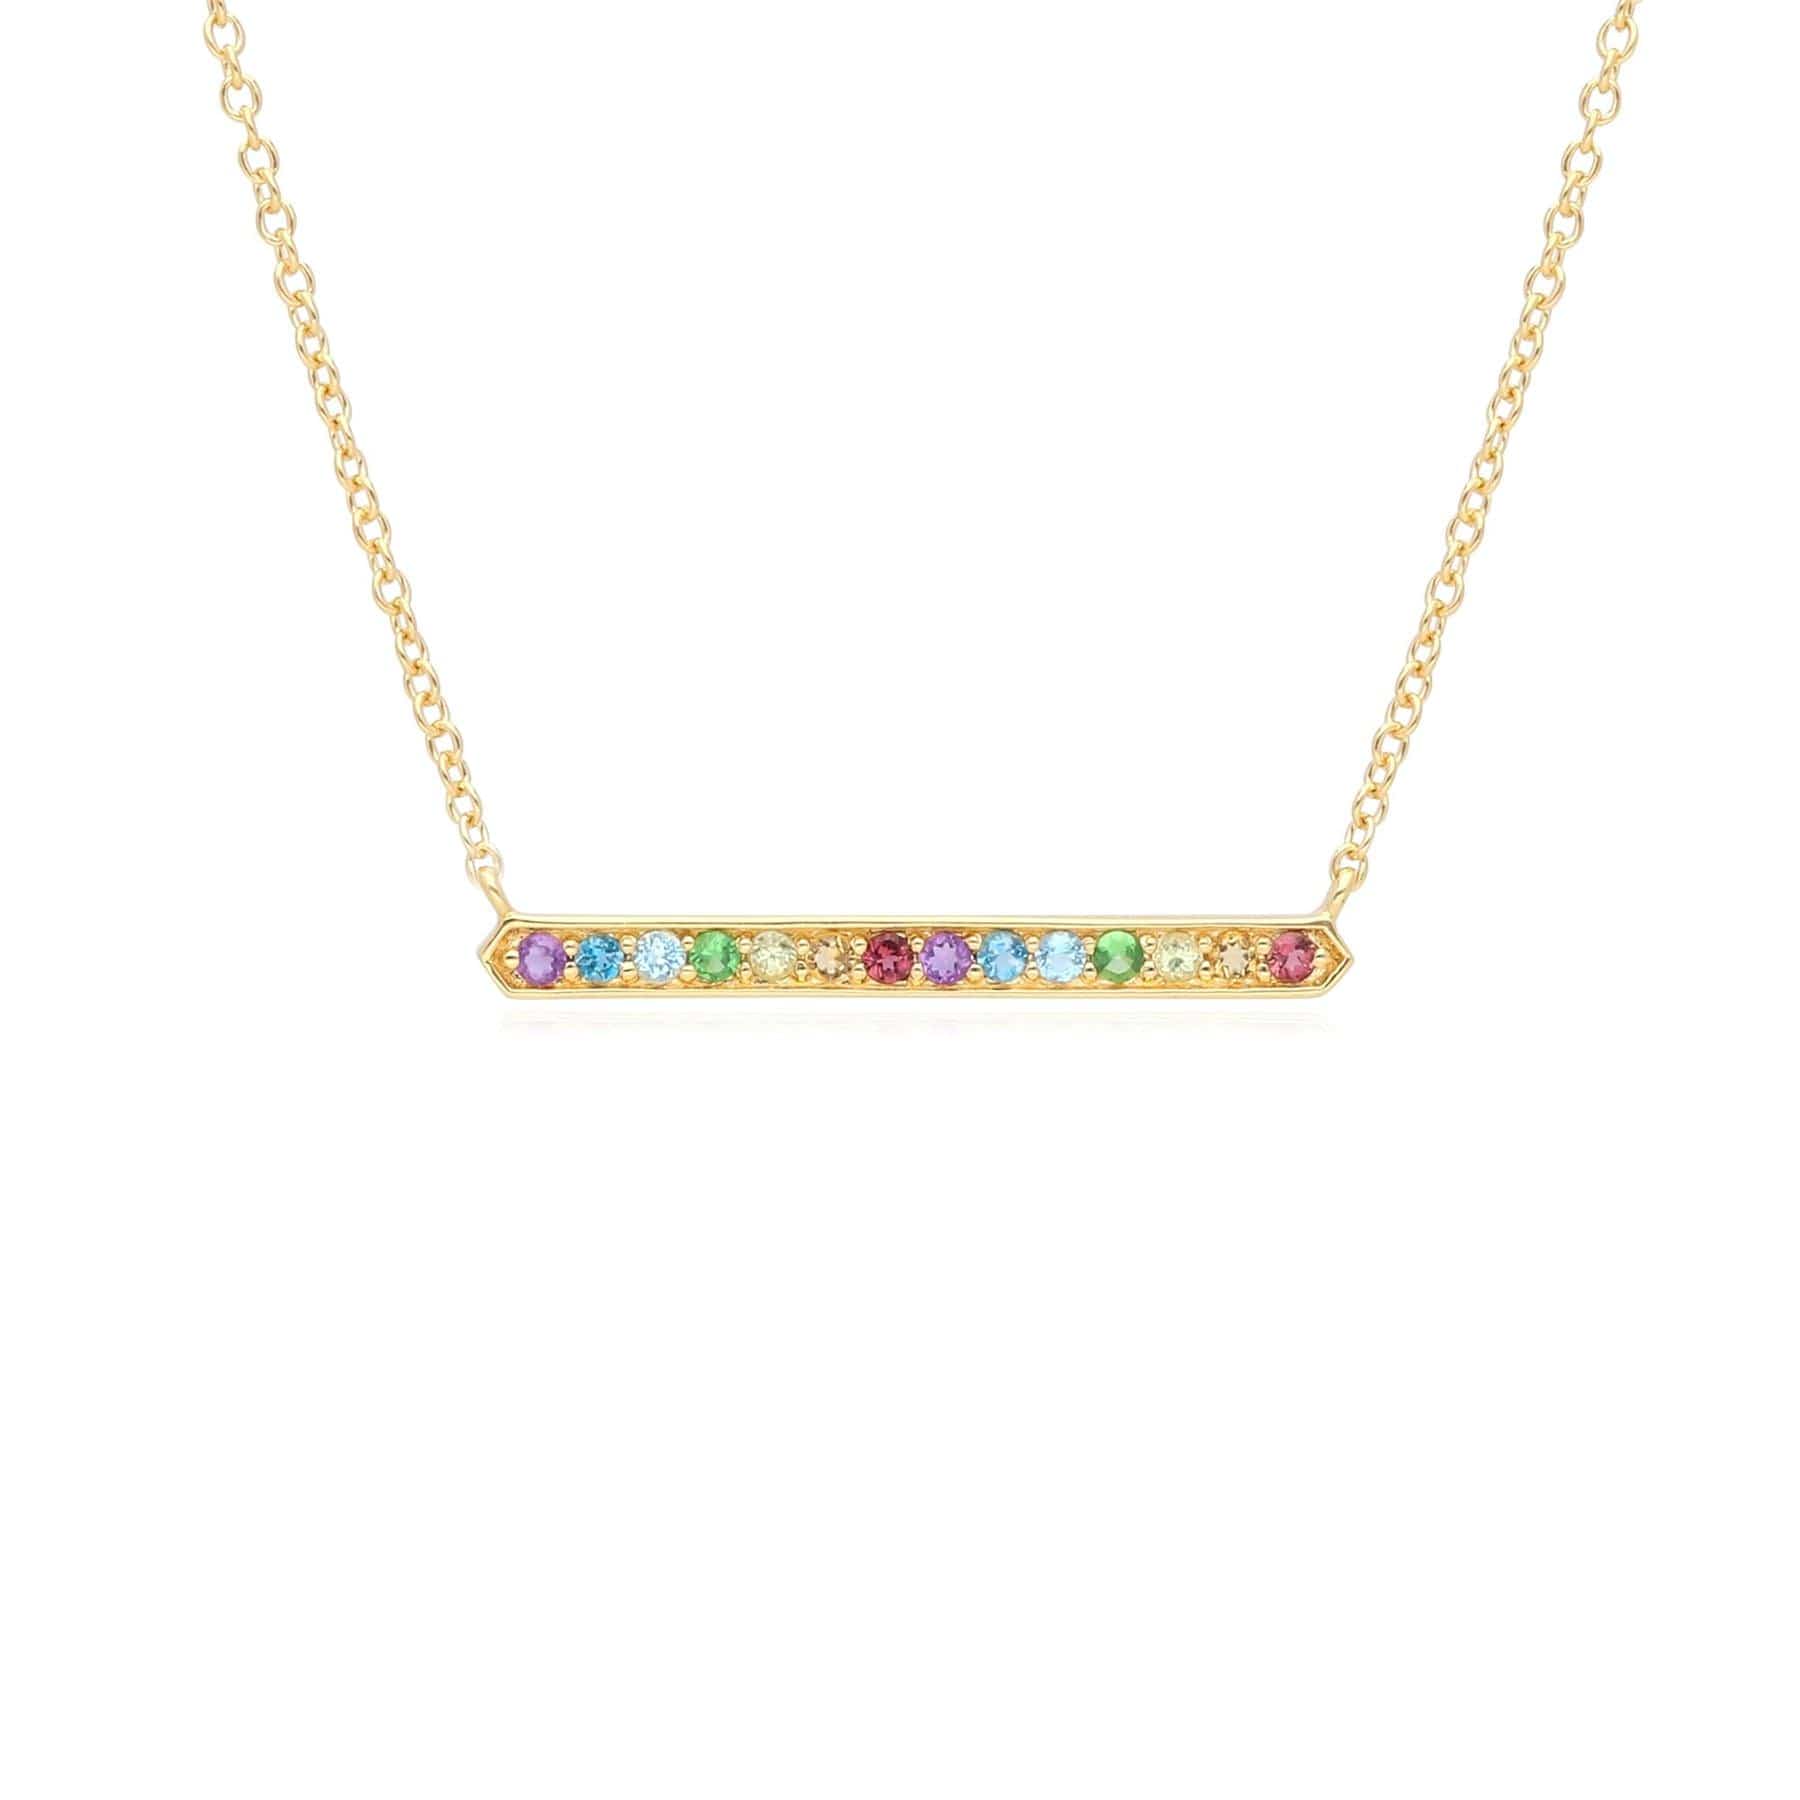 Rainbow Gemstone Bar Necklace in Gold Plated Sterling Silver